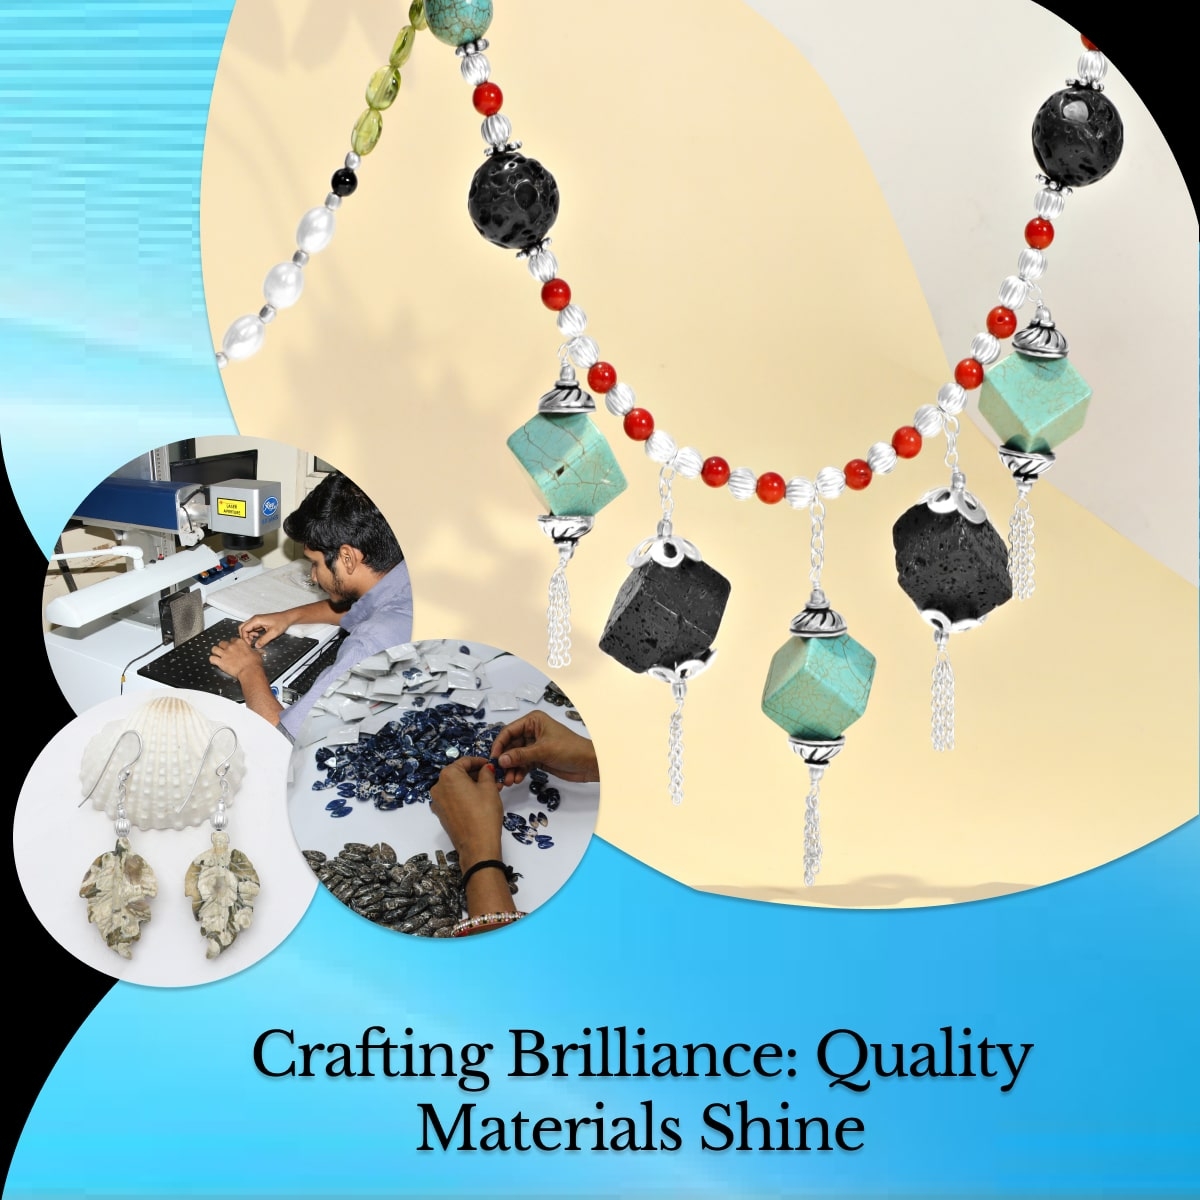 Purchase Materials That Are High-Quality